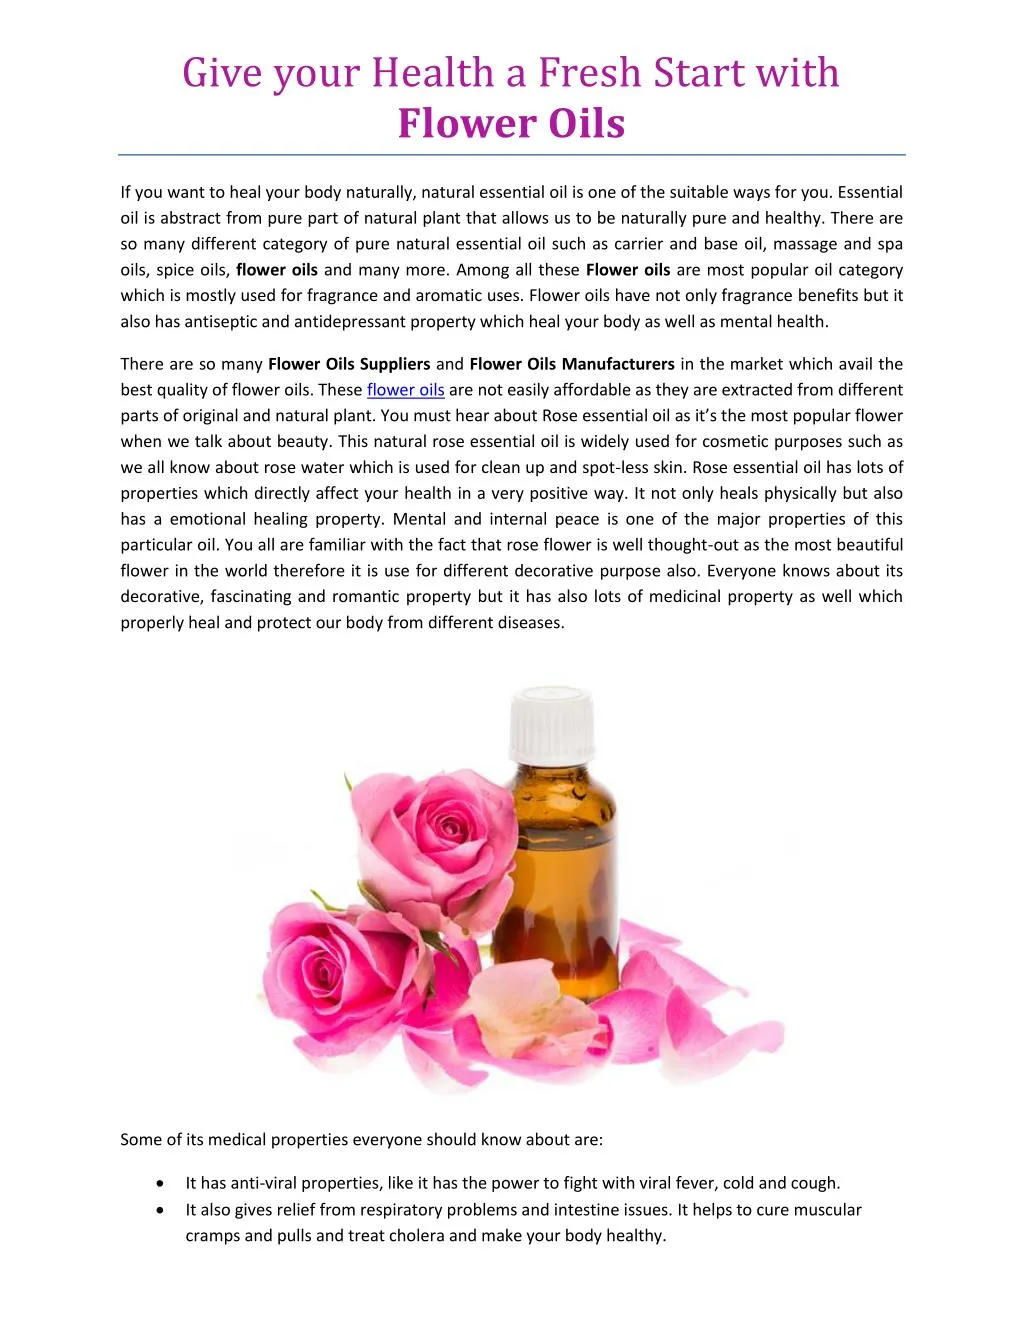 give your health a fresh start with flower oils